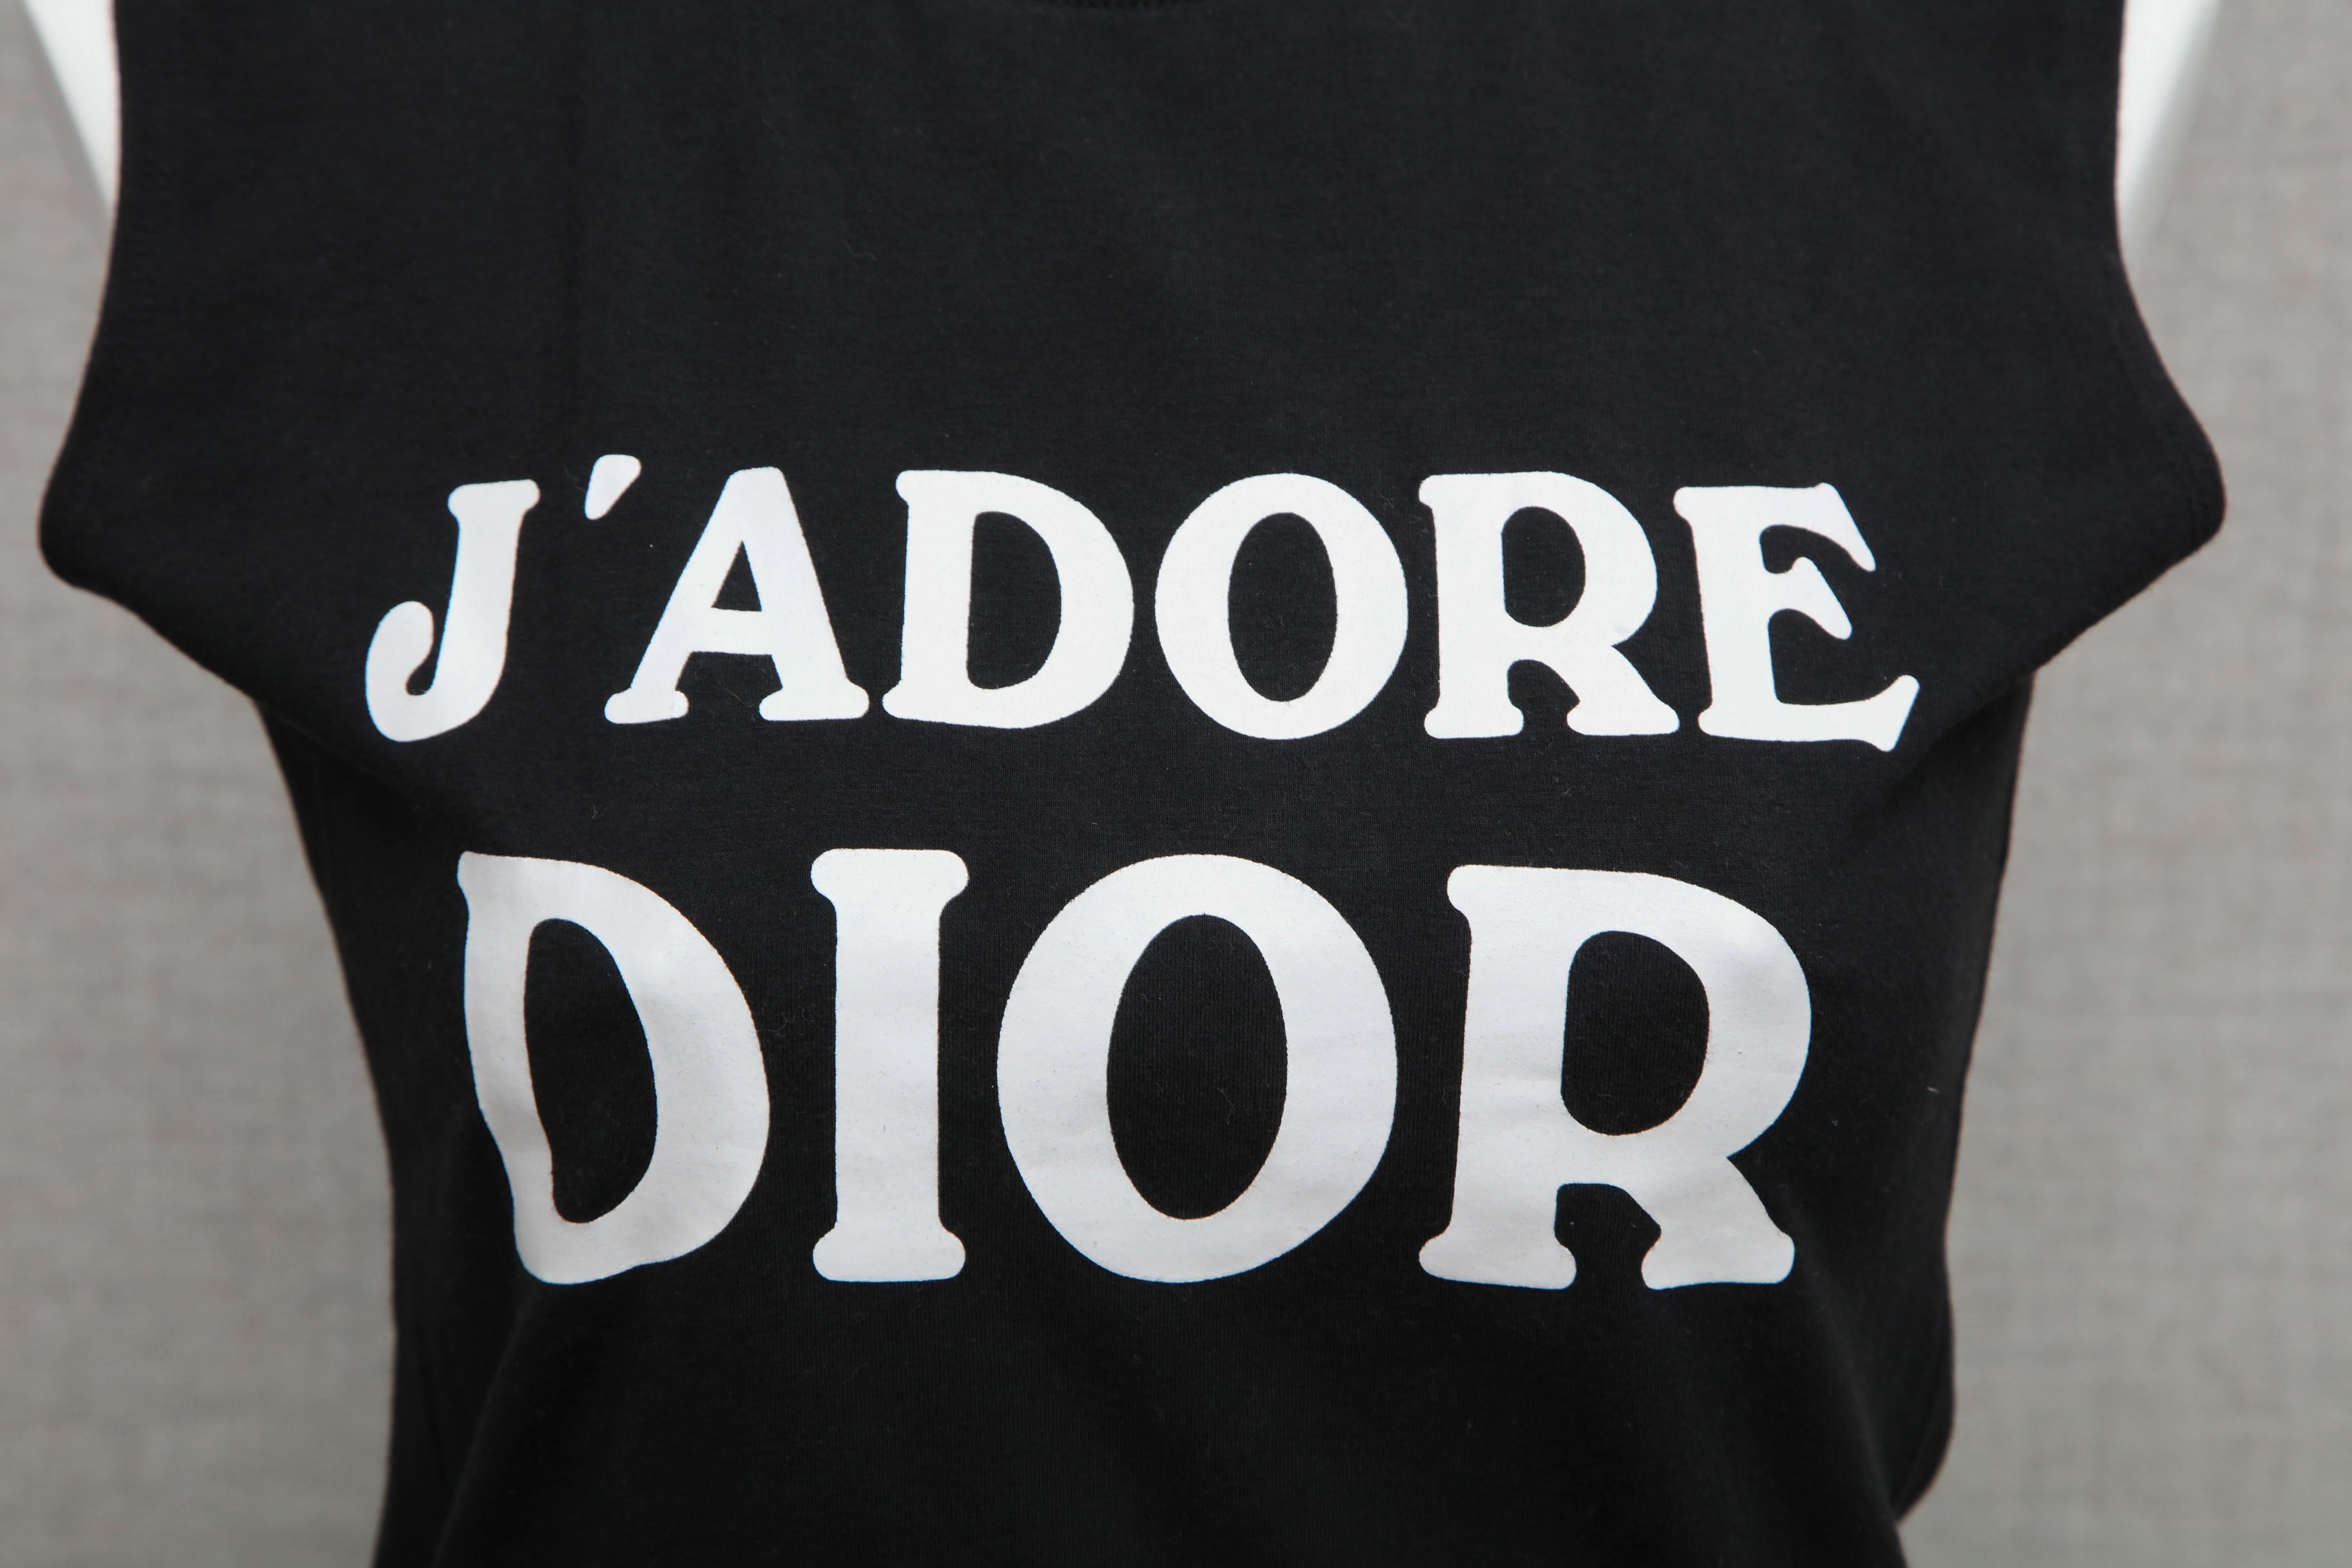 John Galliano for Christian Dior tank top with iconic J'ADORE DIOR logo.

French size 38